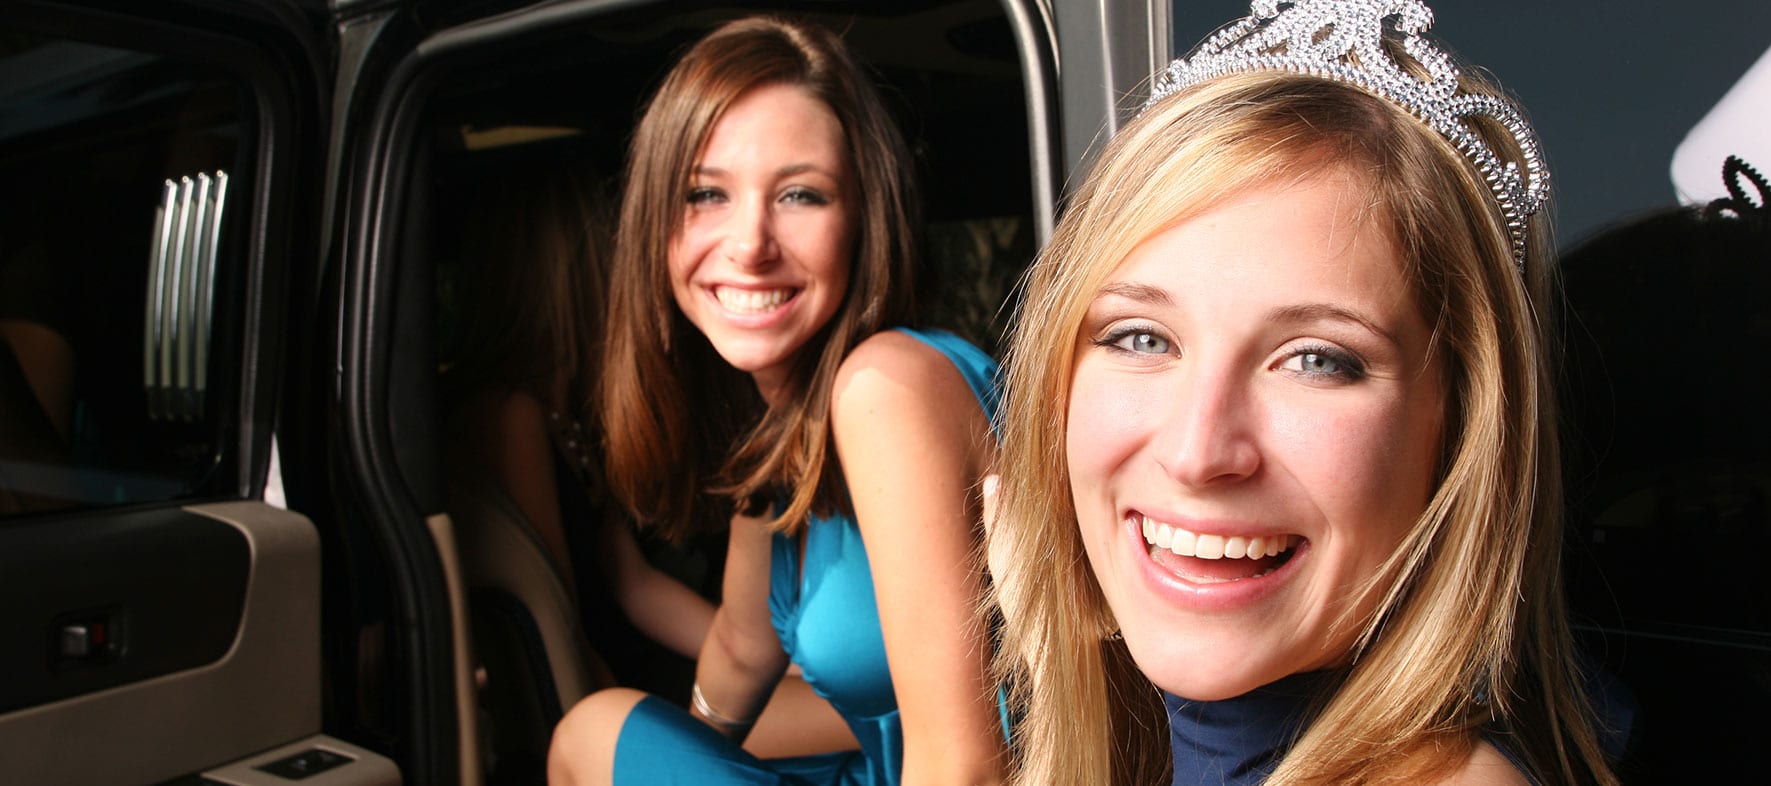 Luxury Limousine Prom/Homecoming Rental Services